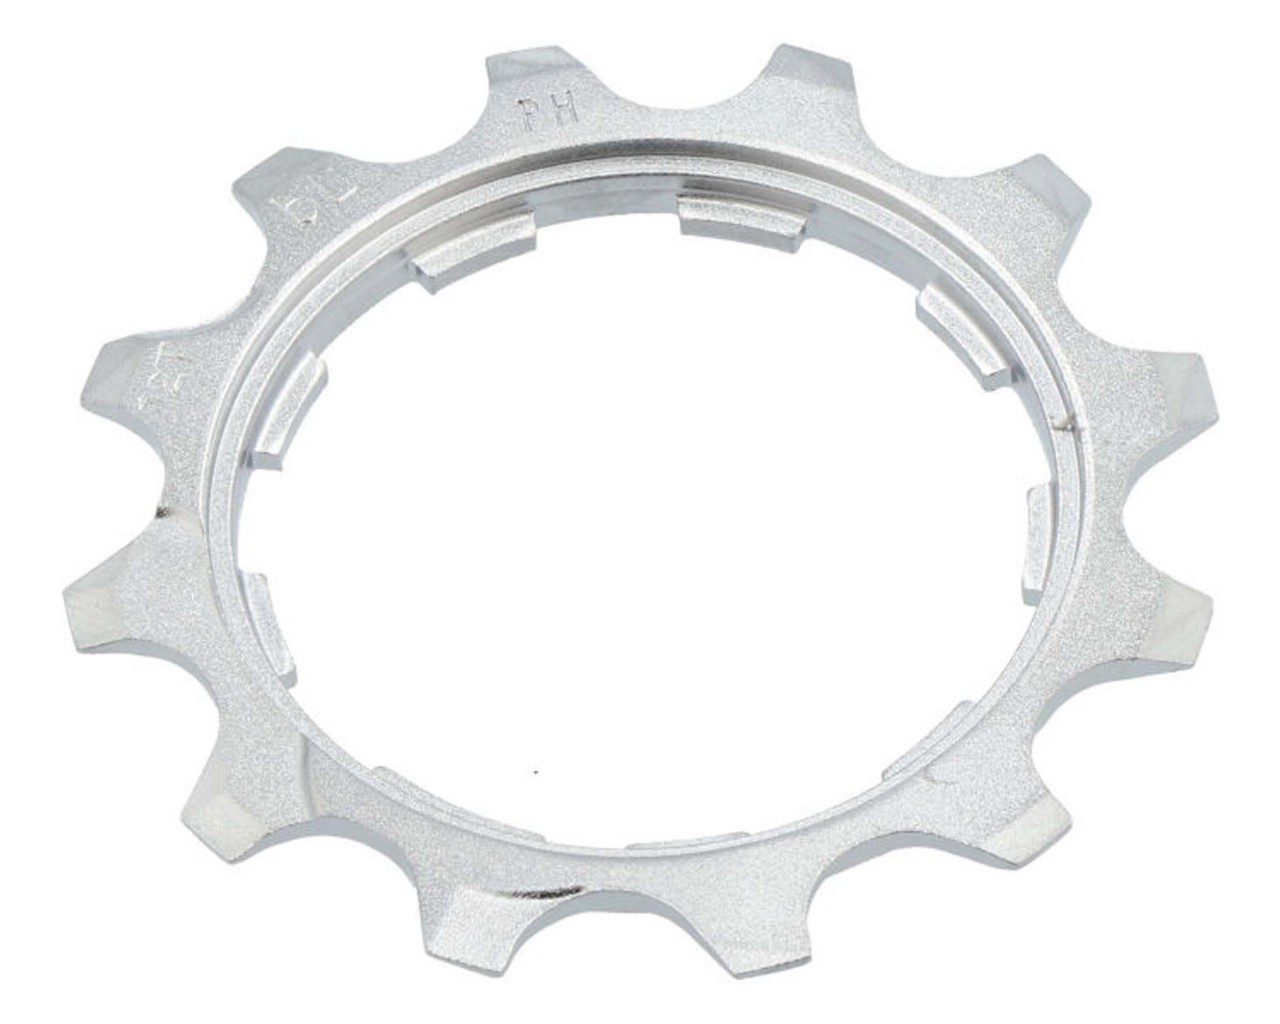 Shimano Sprocket 12T (11-32T only) with built-in Spacer for CS-M771